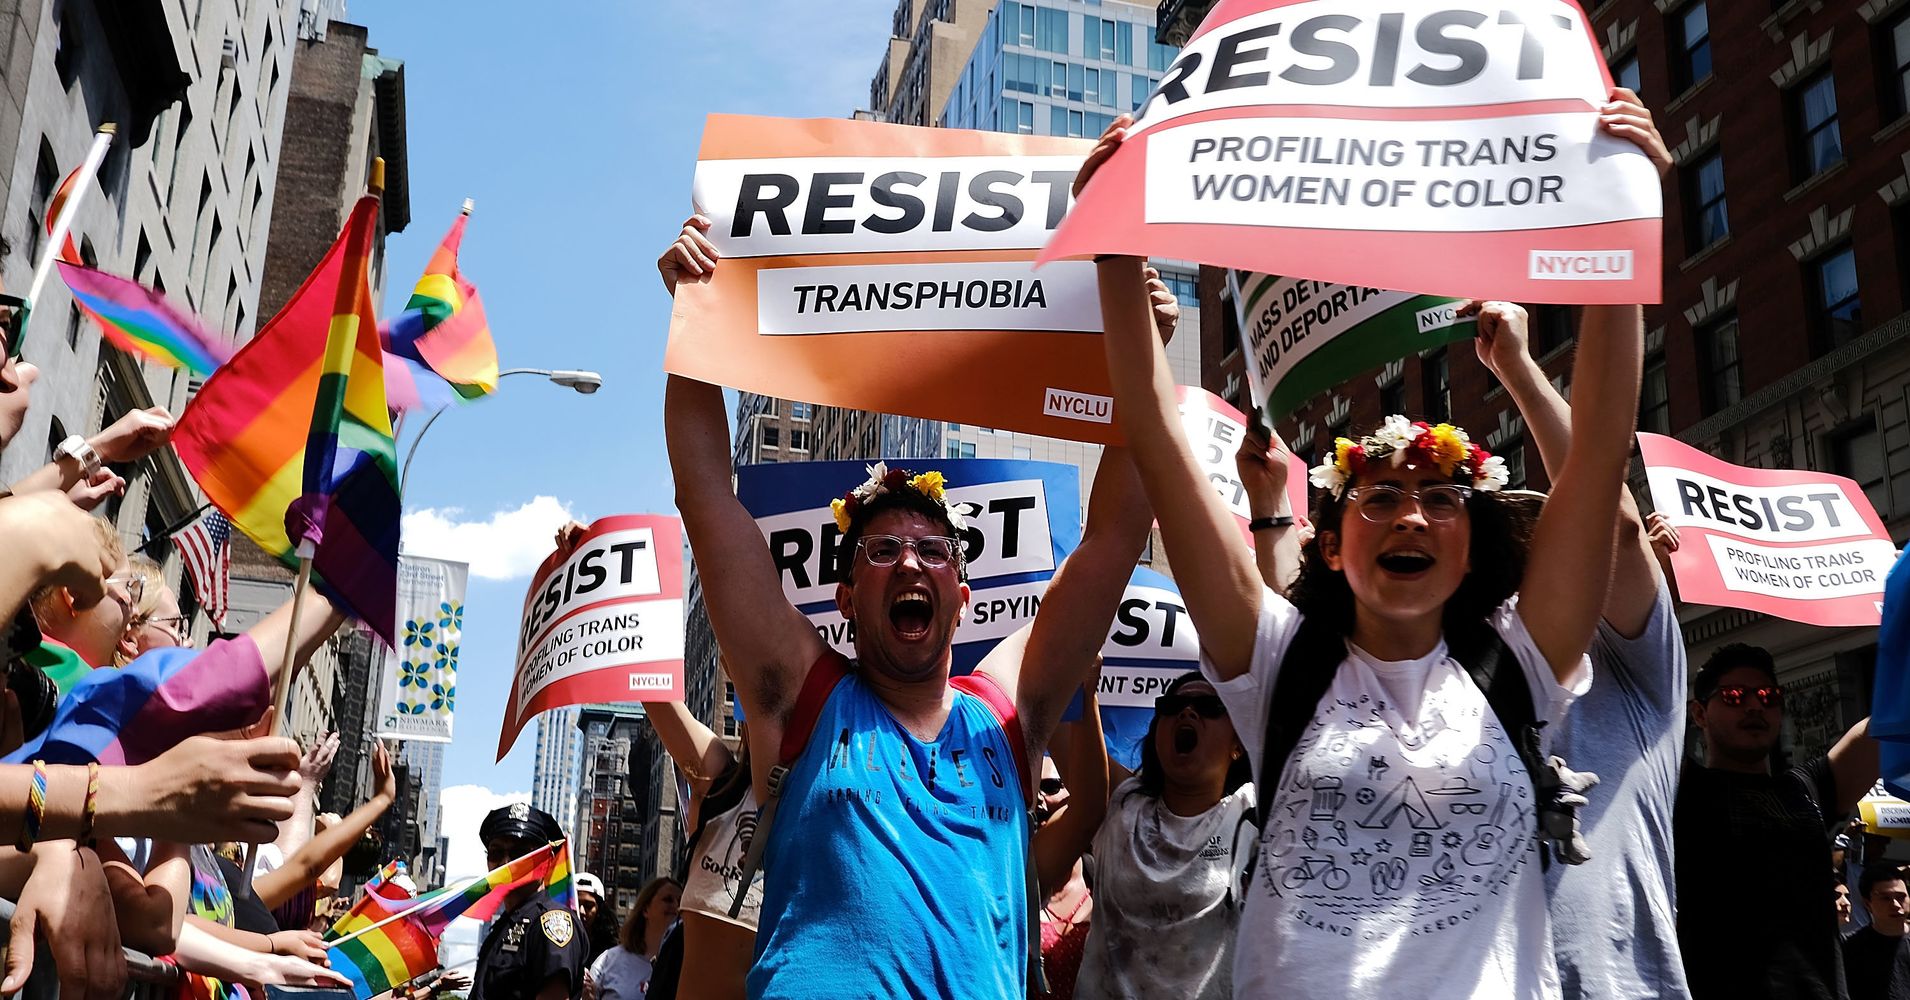 33 Fierce Signs Of Resistance From Pride Marches Across The U.S. HuffPost